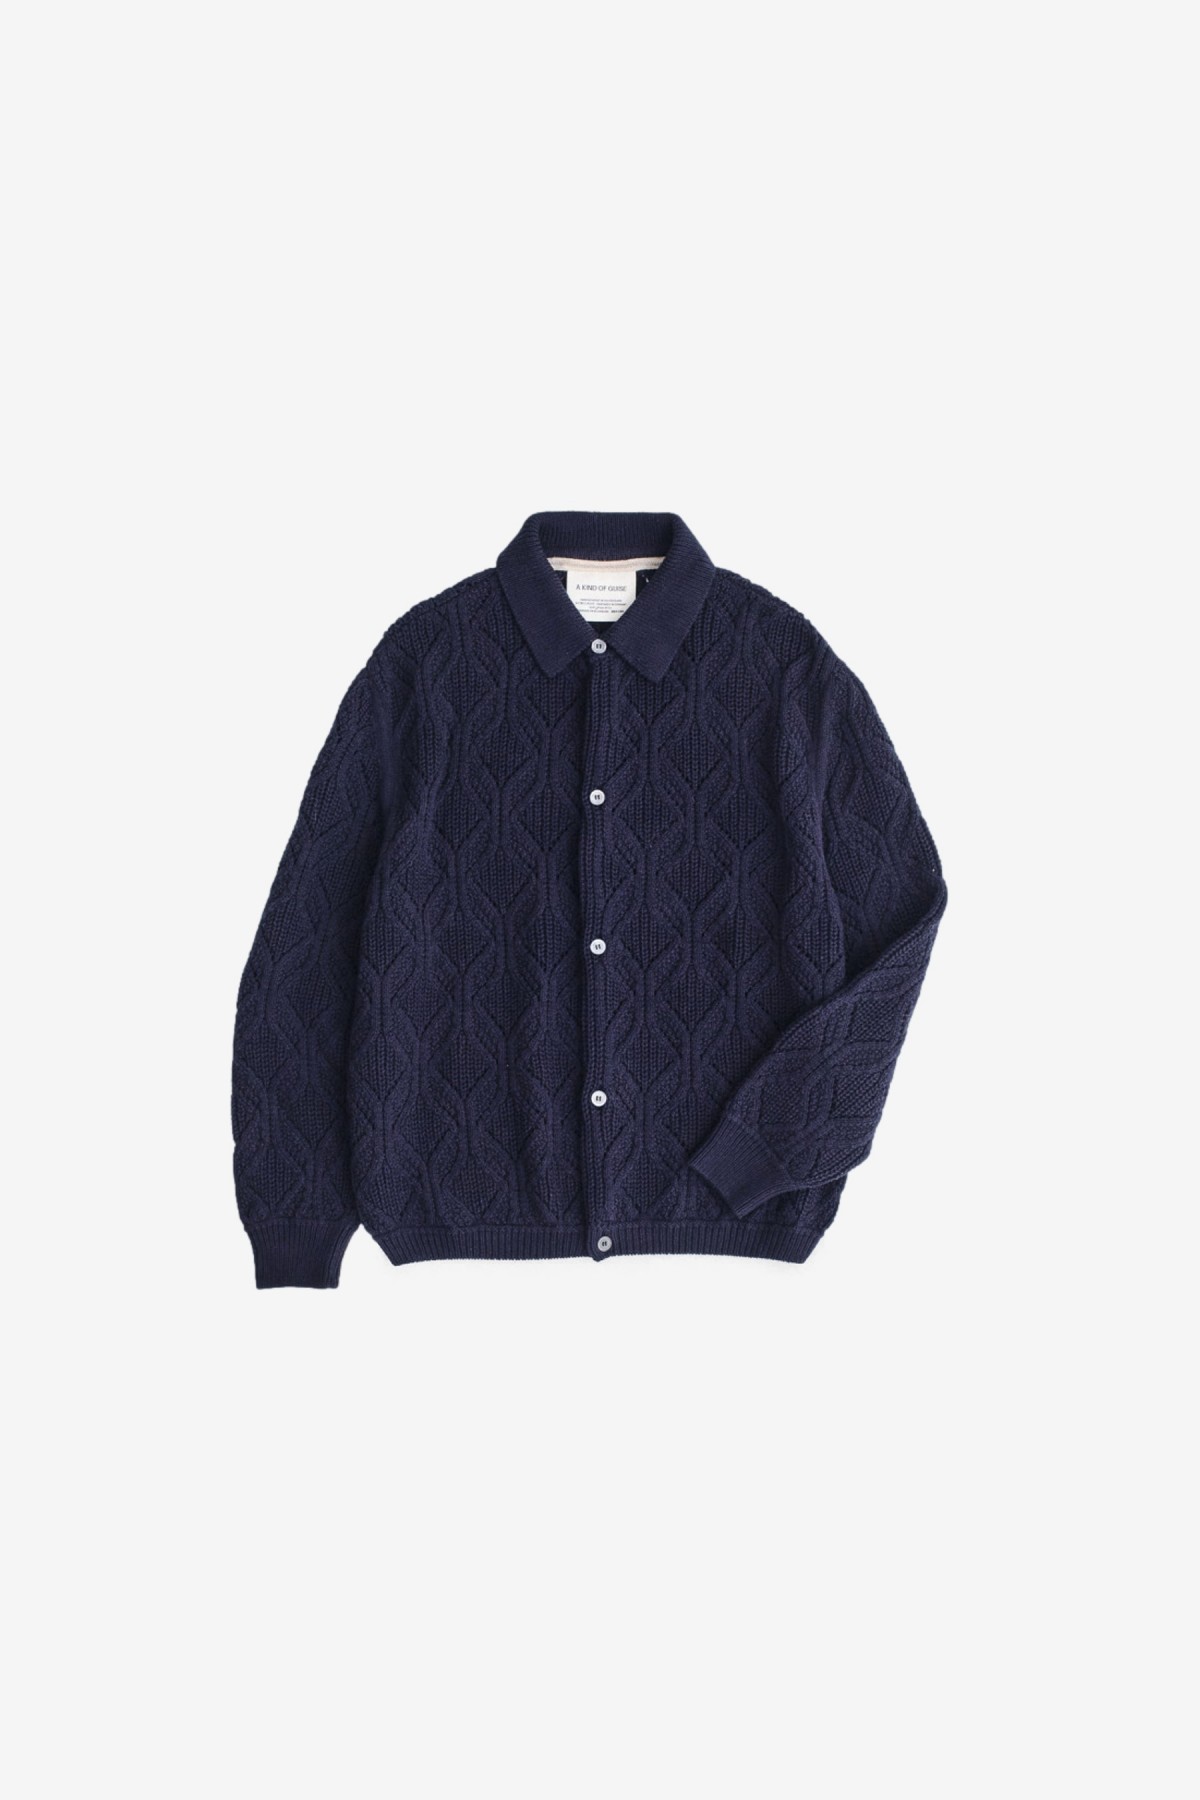 A Kind of Guise Per Knit Polo Jacket in Midnight Navy